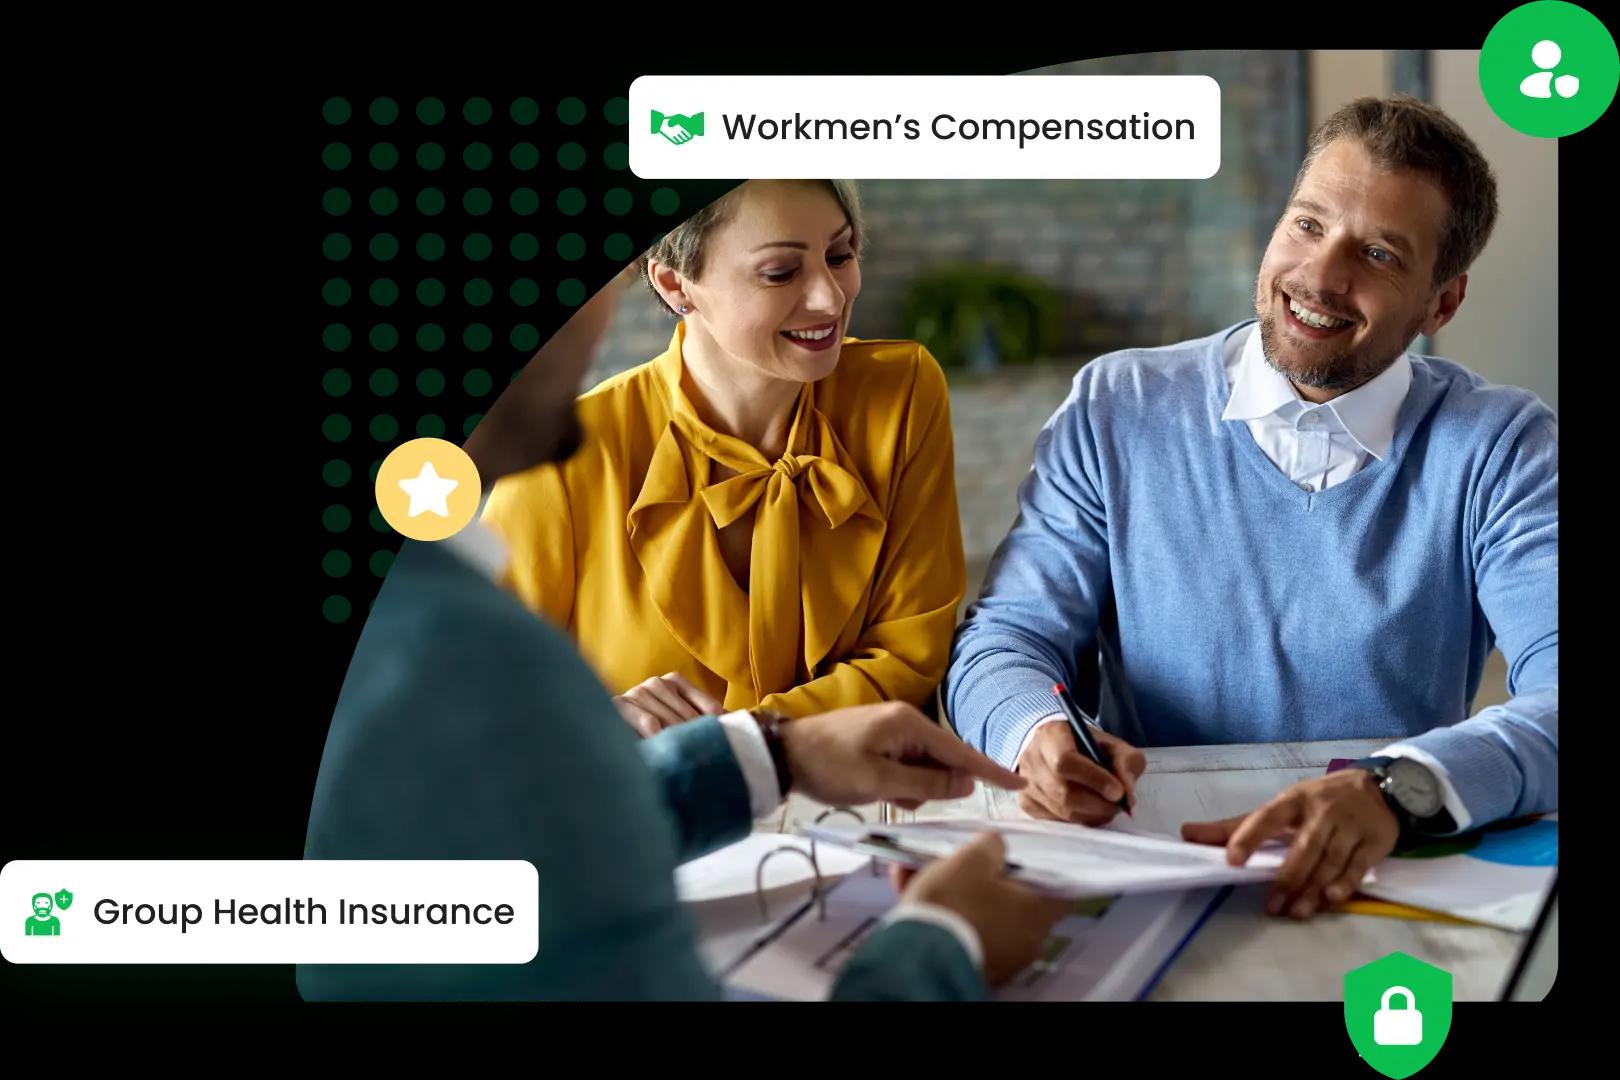 A professional setting where a team is reviewing documents at a desk with a man, surrounded by icons of workmen's compensation and group health insurance, suggesting a discussion or sale of insurance plans.